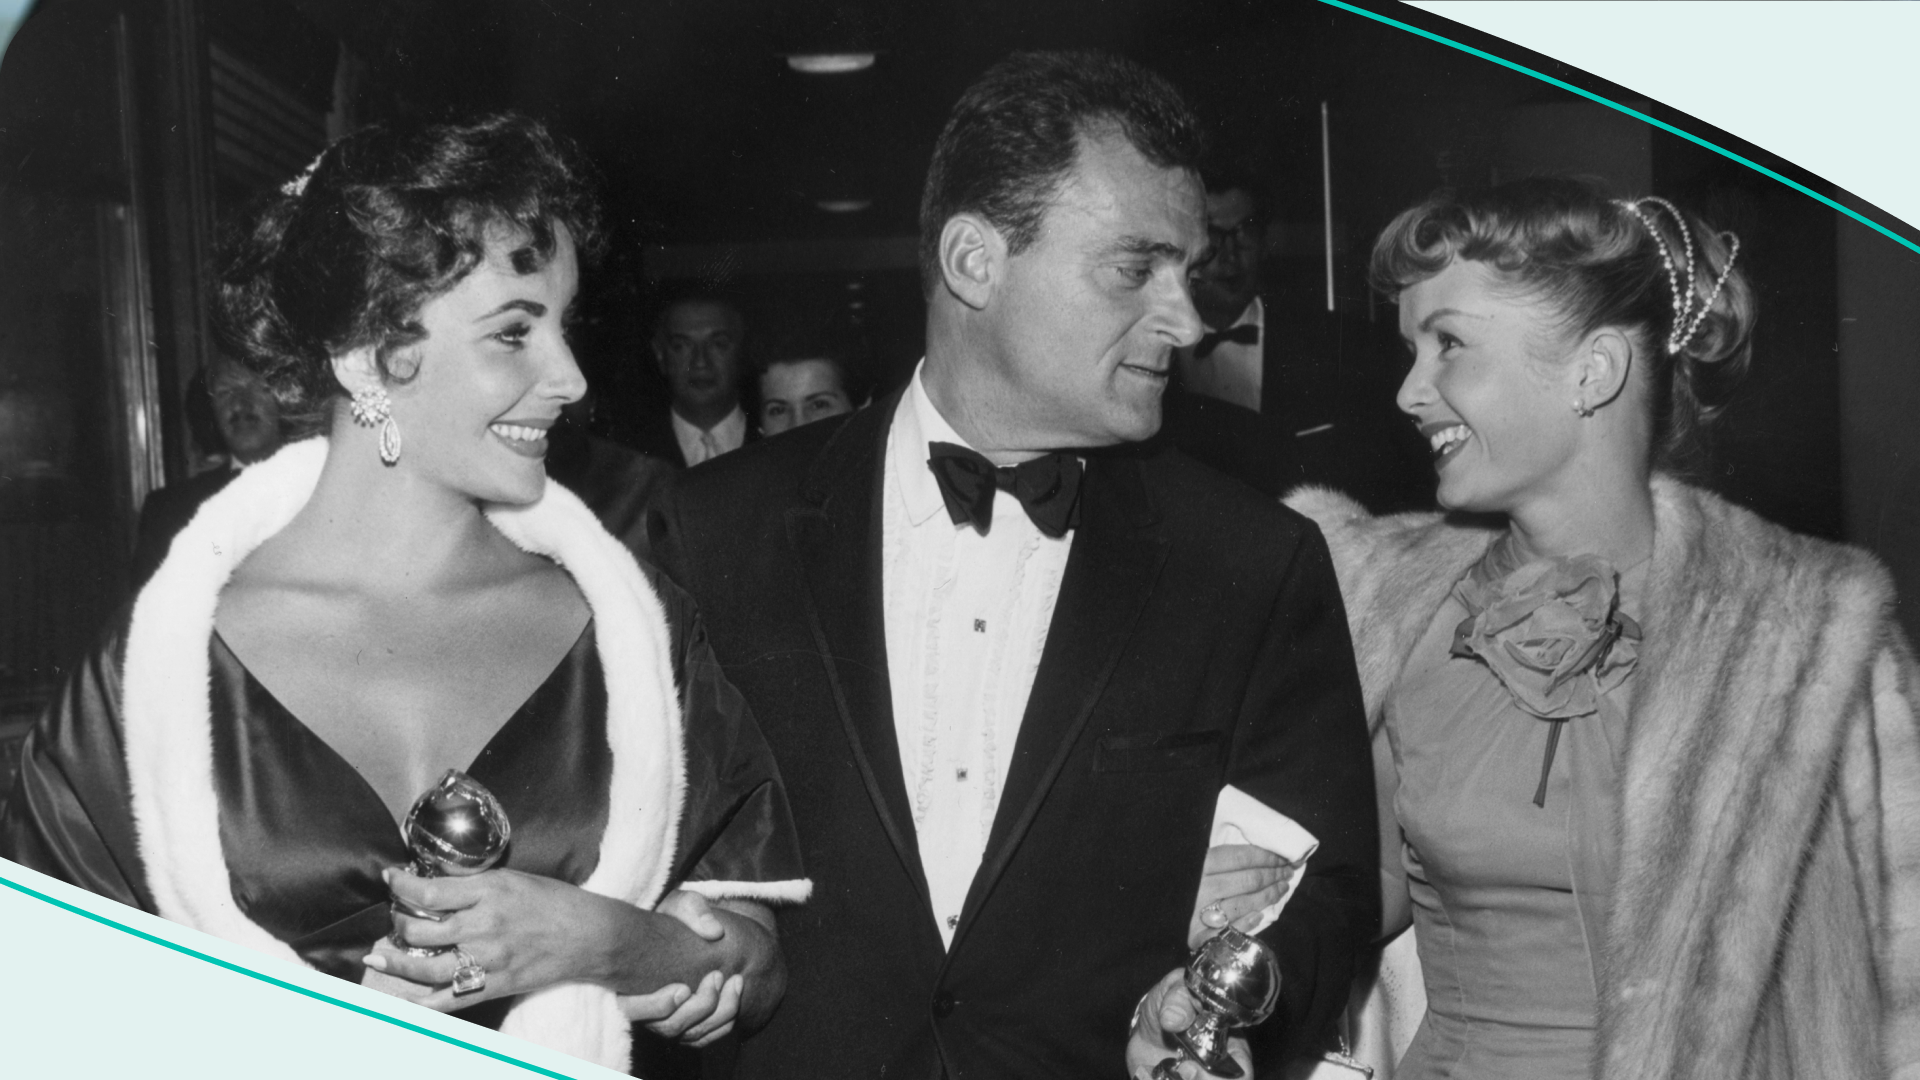 28th February 1957: From left to right, British-born actor Elizabeth Taylor and her husband, film producer Mike Todd (1909 - 1958), hold their Golden Globe awards while walking with American actor Debbie Reynolds.